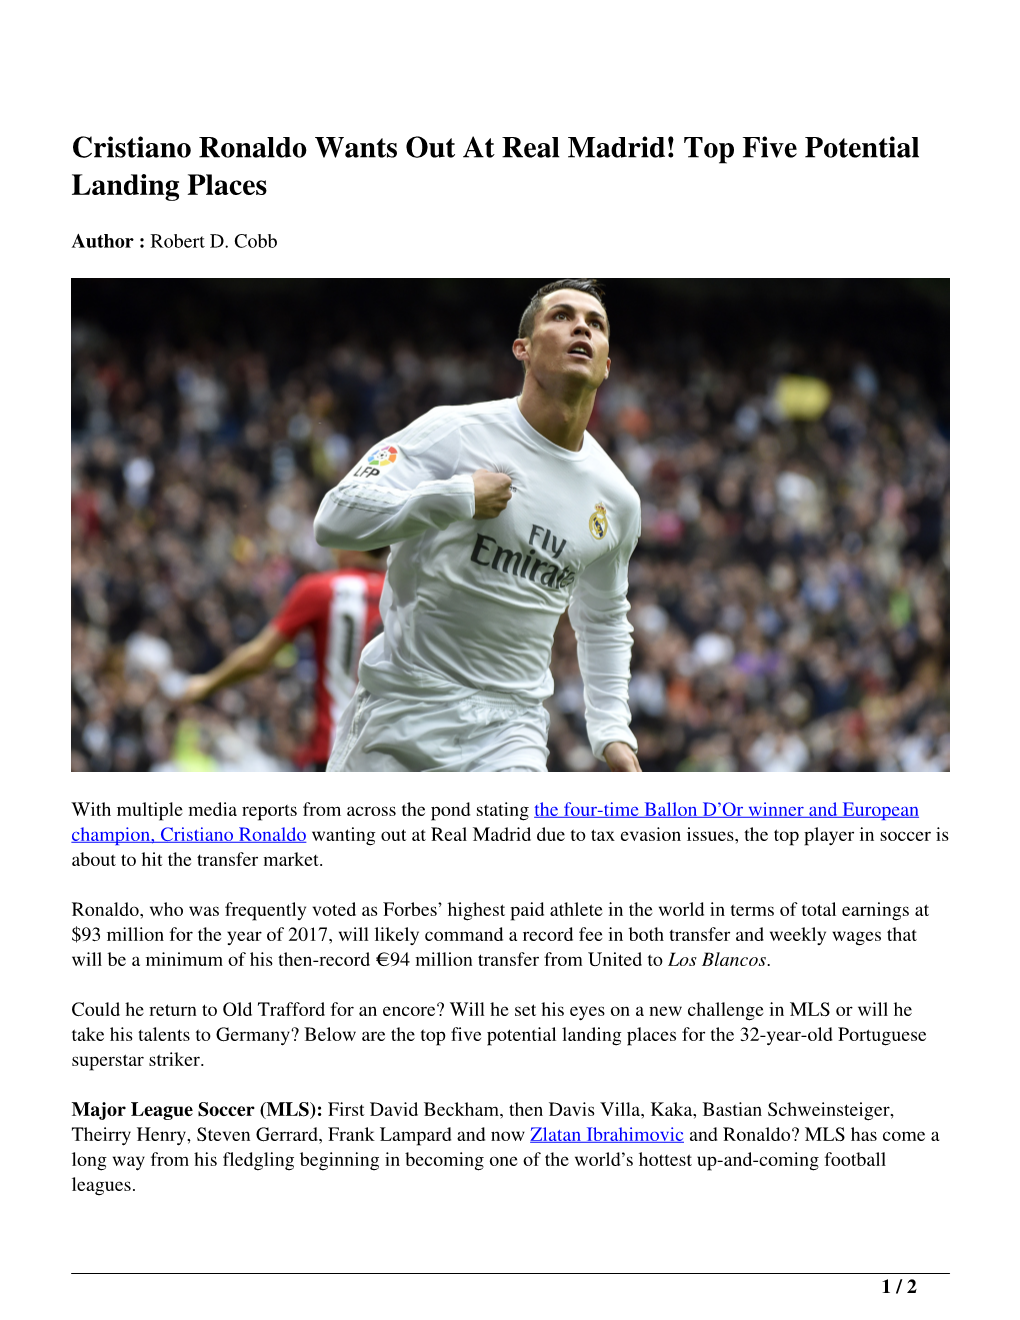 Cristiano Ronaldo Wants out at Real Madrid! Top Five Potential Landing Places